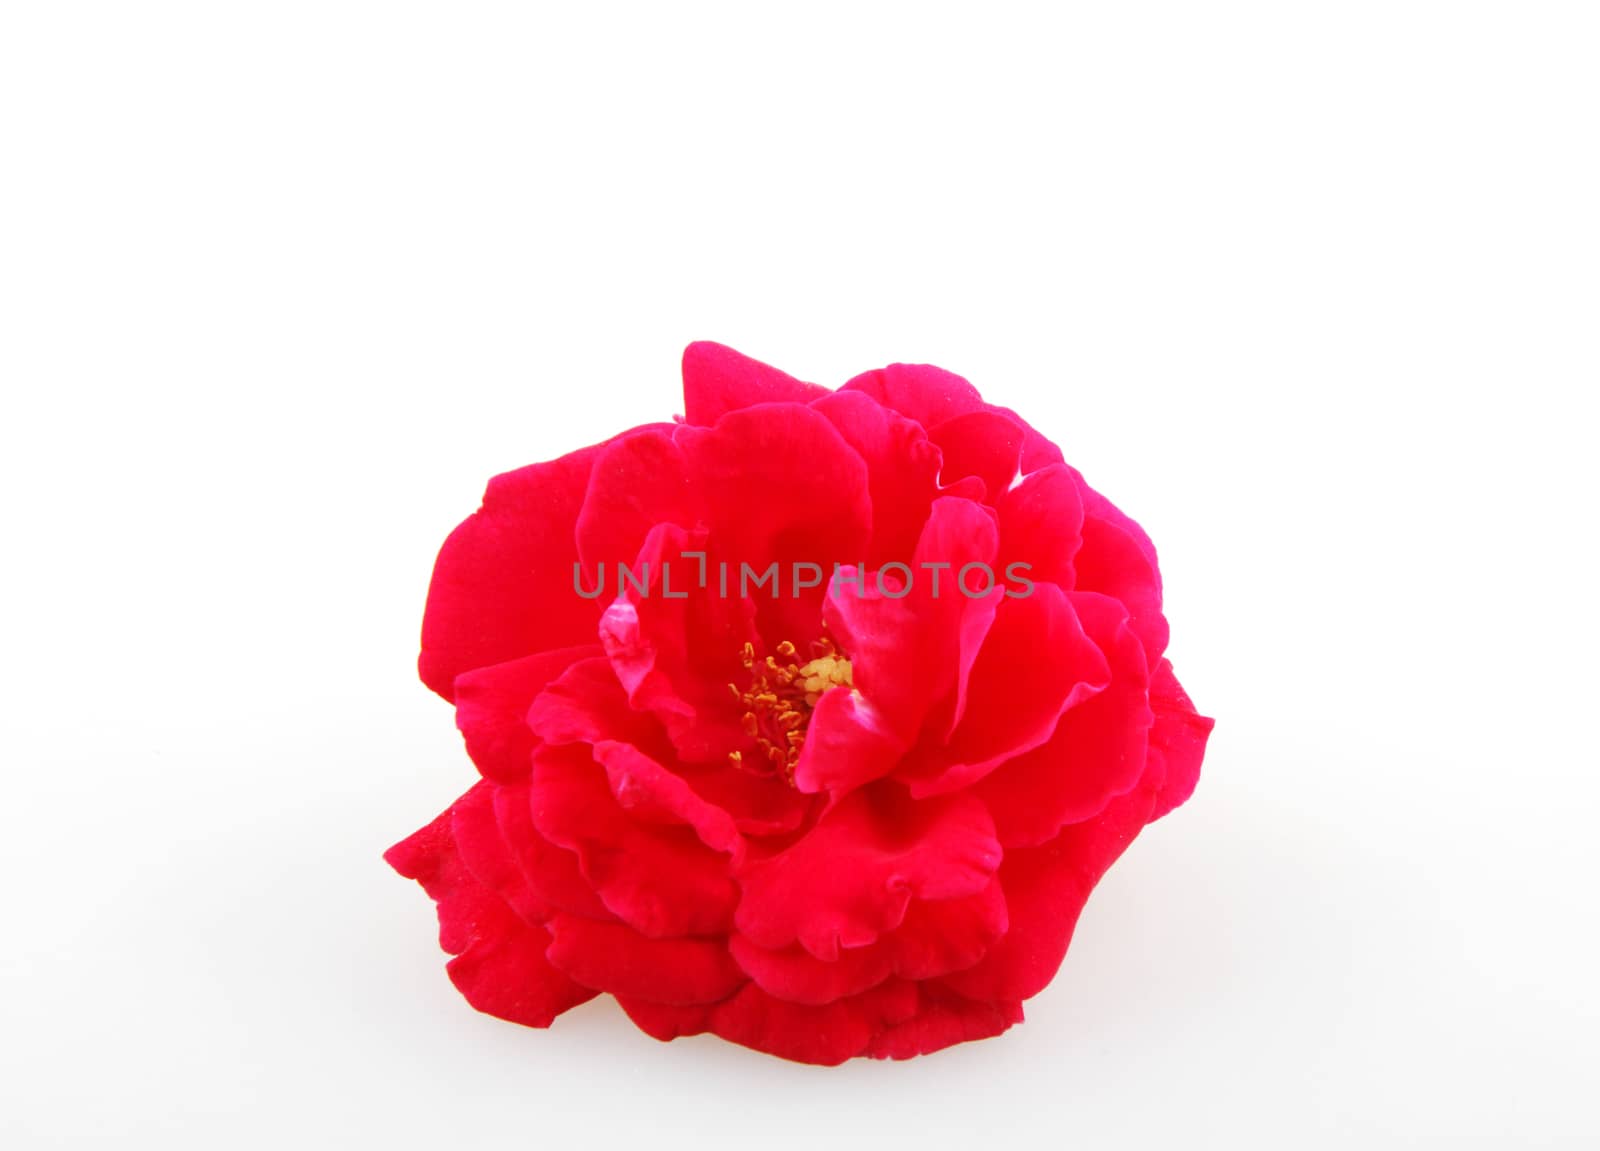 Blooming Red Rose Isolated On White Background 